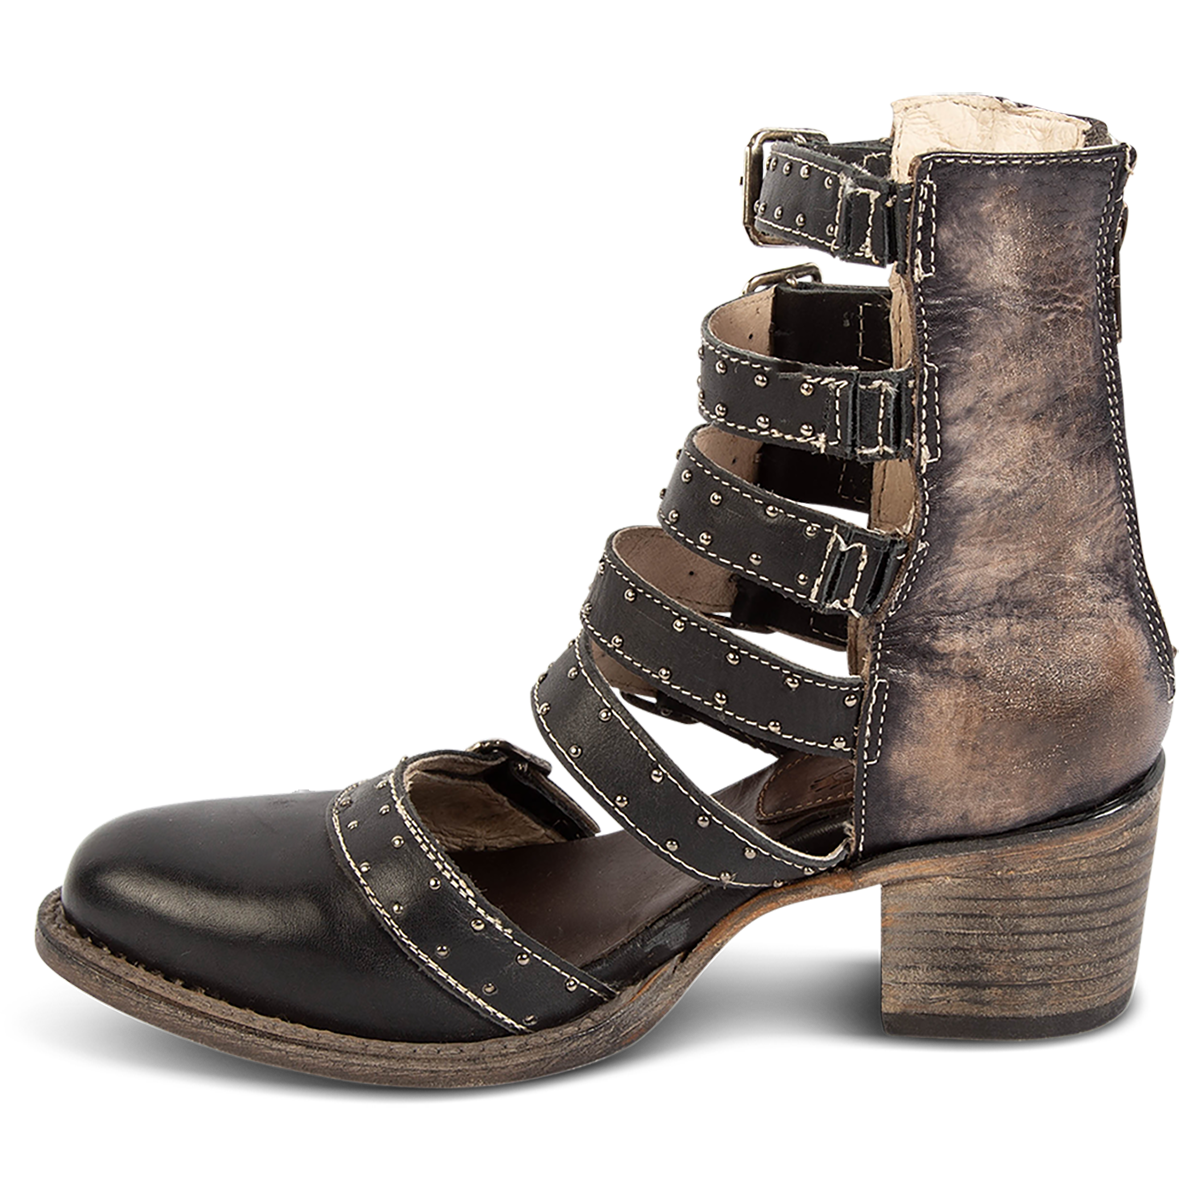 Inside view showing a stacked heel, adjustable leather straps and embellishments on FREEBIRD women's Salty black leather bootie